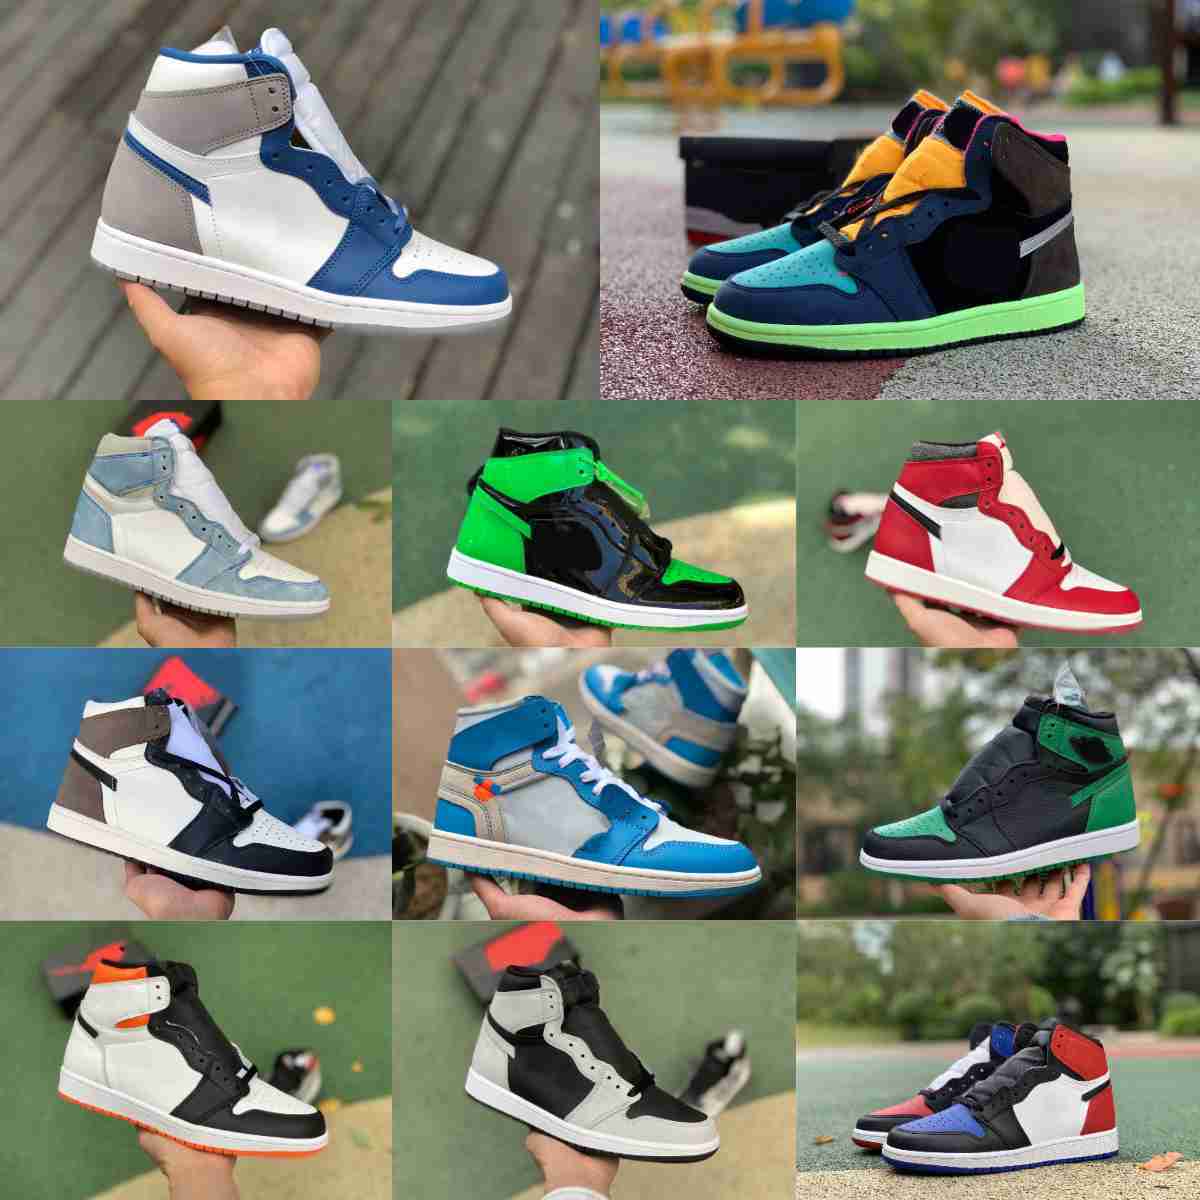 

Jumpman 1 1s Denim Basketball Shoes True Turbo Blue Pine Green Gorge Visionaire Stage Haze Hyper Royal Bio Hack DARK MOCHA Fearless Banned Designer Sports Sneakers S5, Please contact us